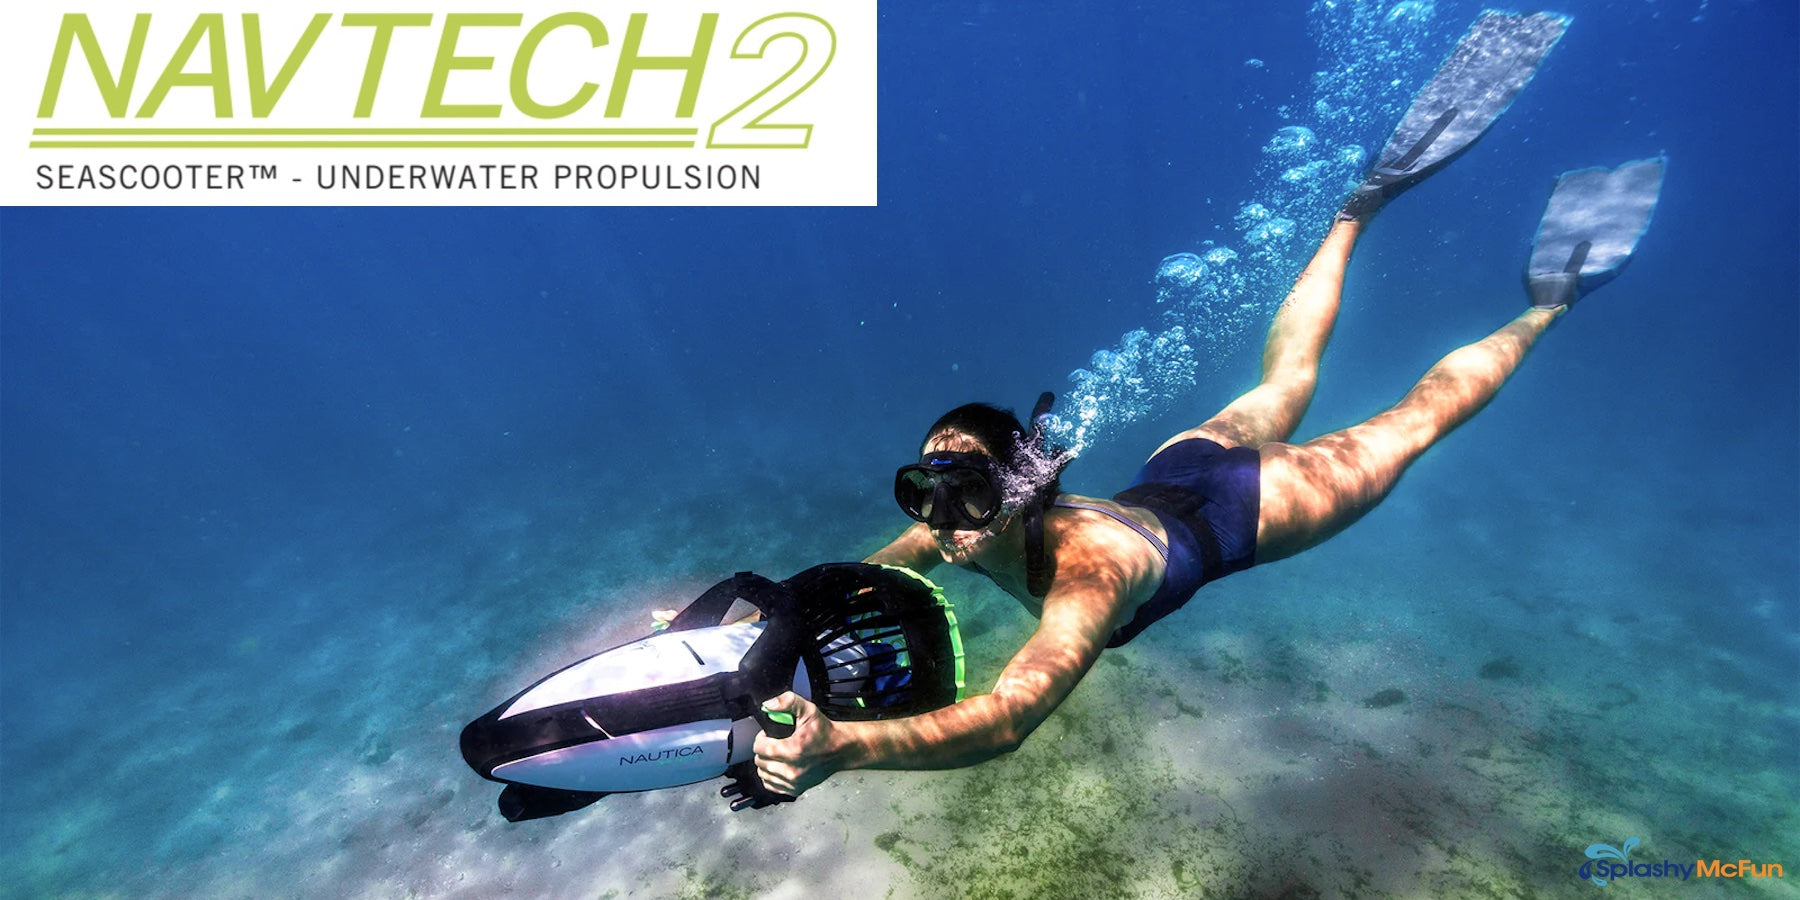 A young woman dives with her Nautica Navtech 2 Sea Scooter in clear blue water